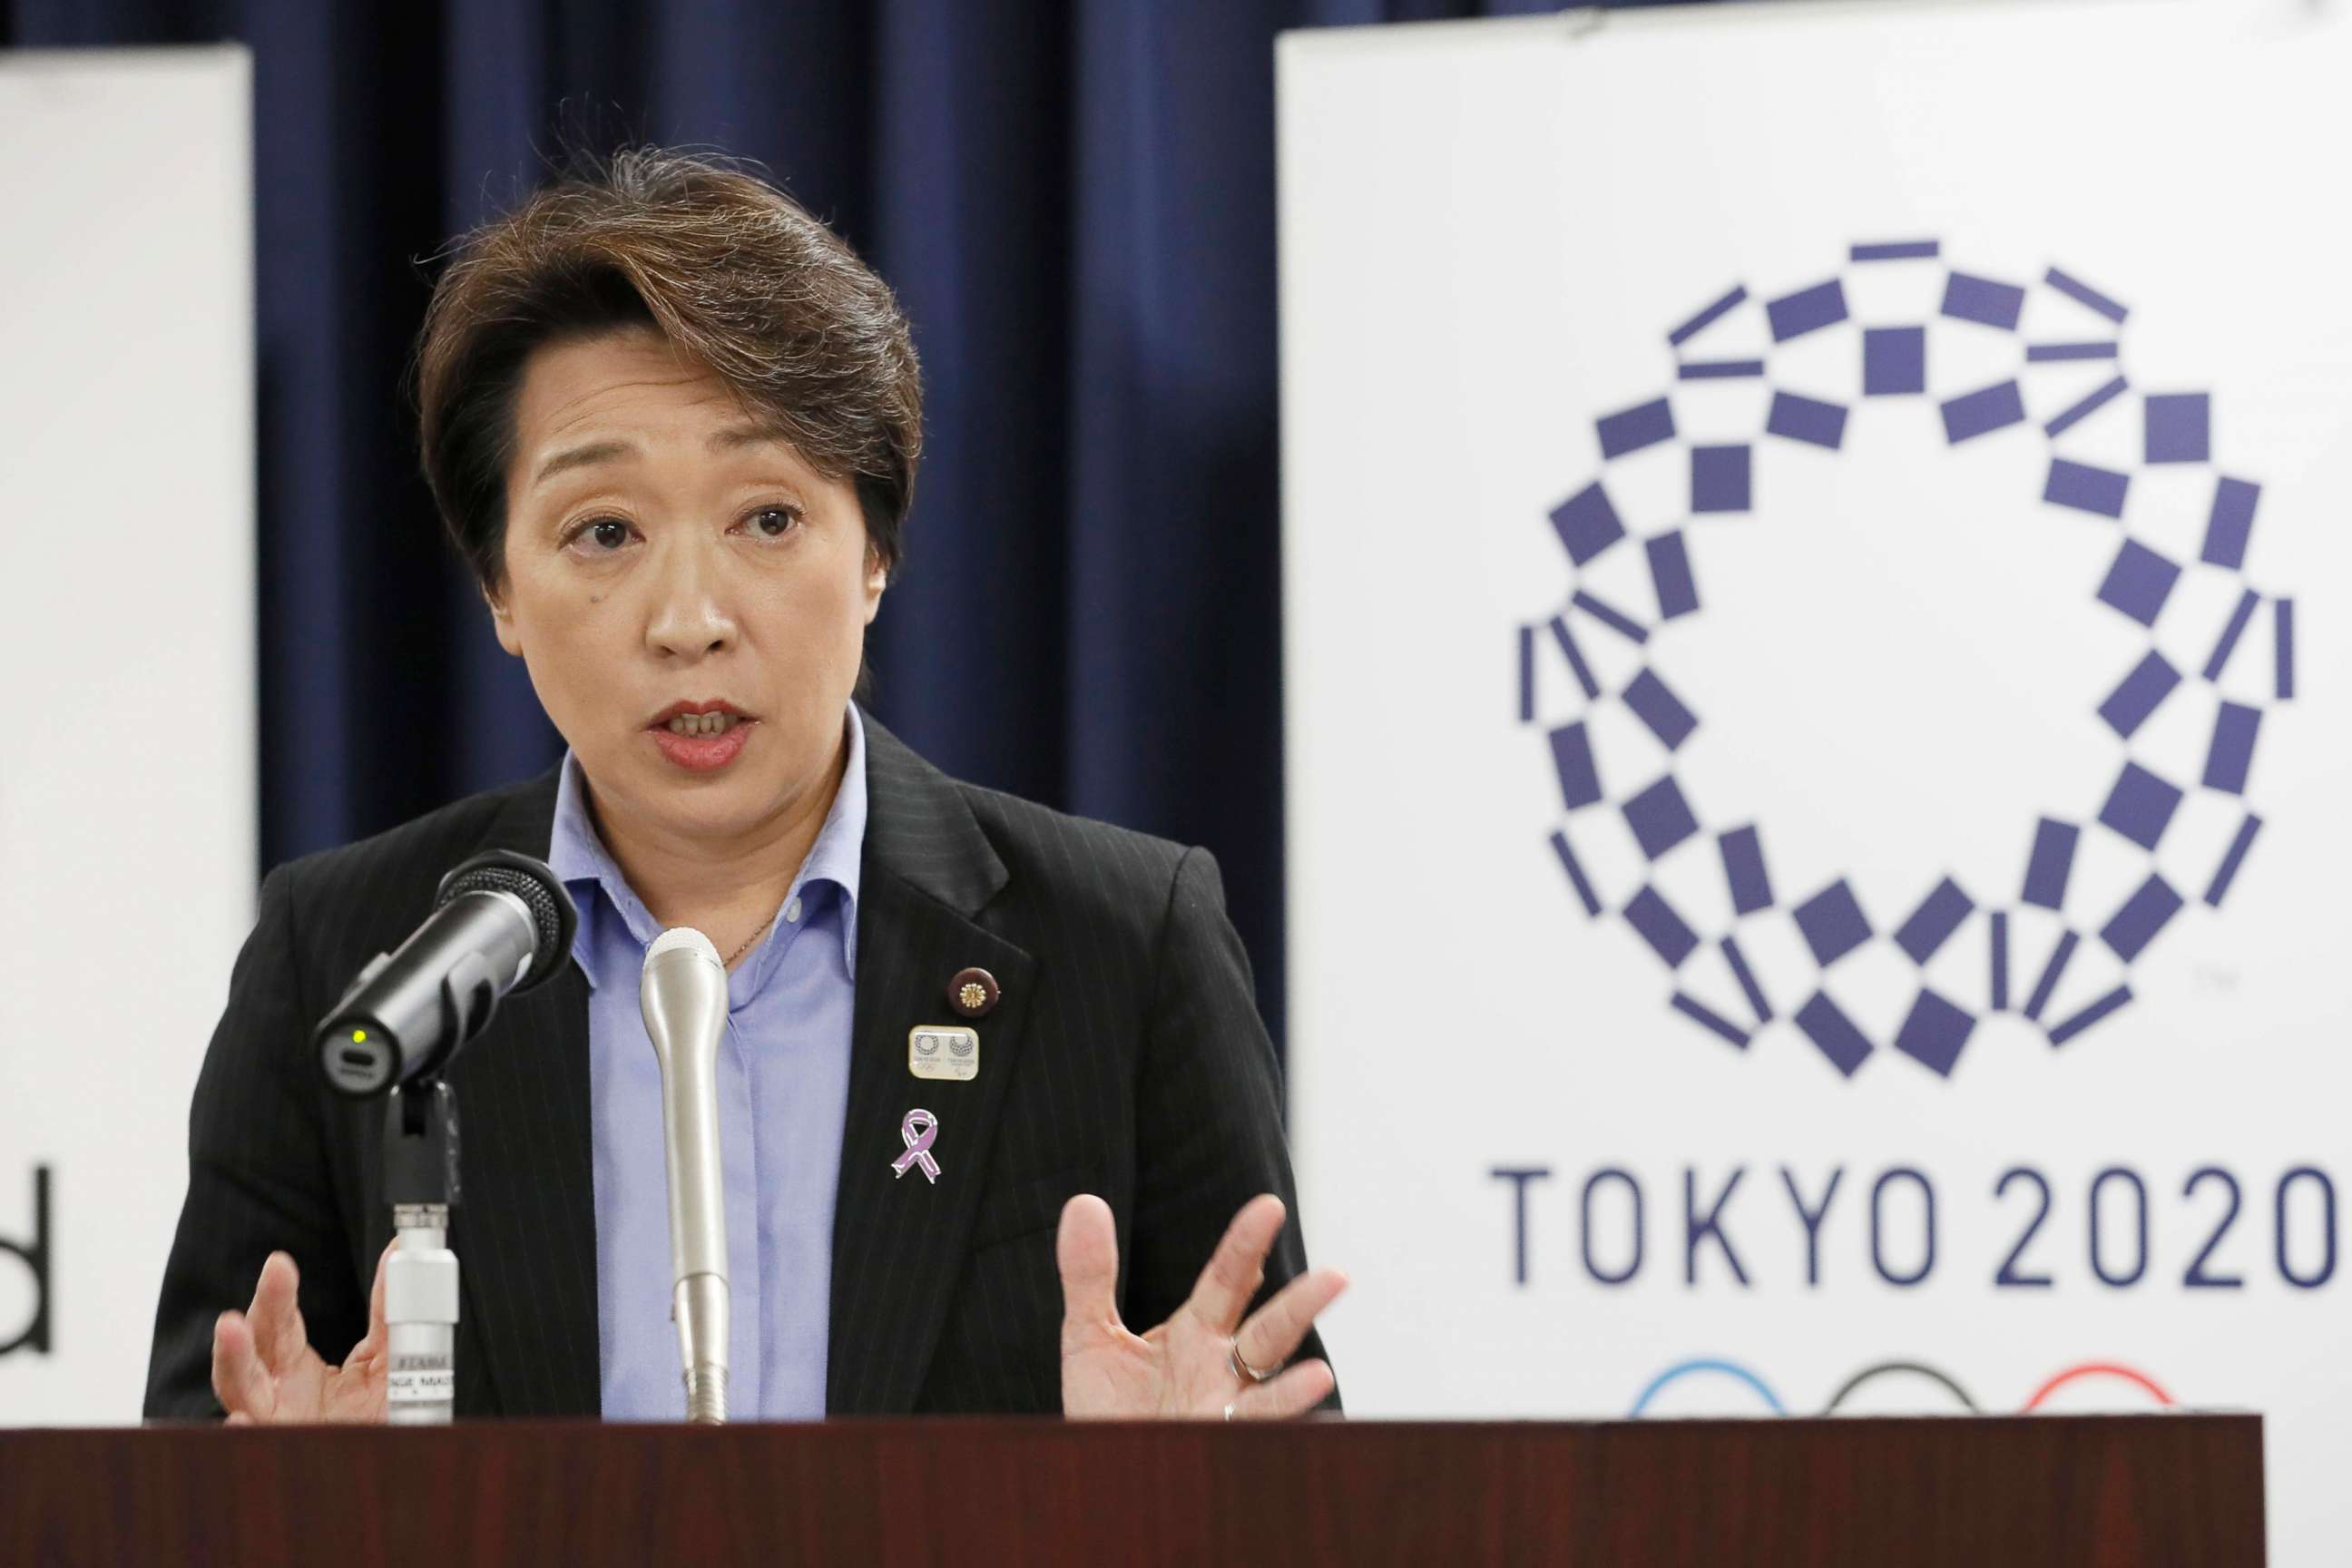 PHOTO: Japan's Olympics Minister Seiko Hashimoto speaks during a press conference at the cabinet office in Tokyo on Sept. 19, 2019.